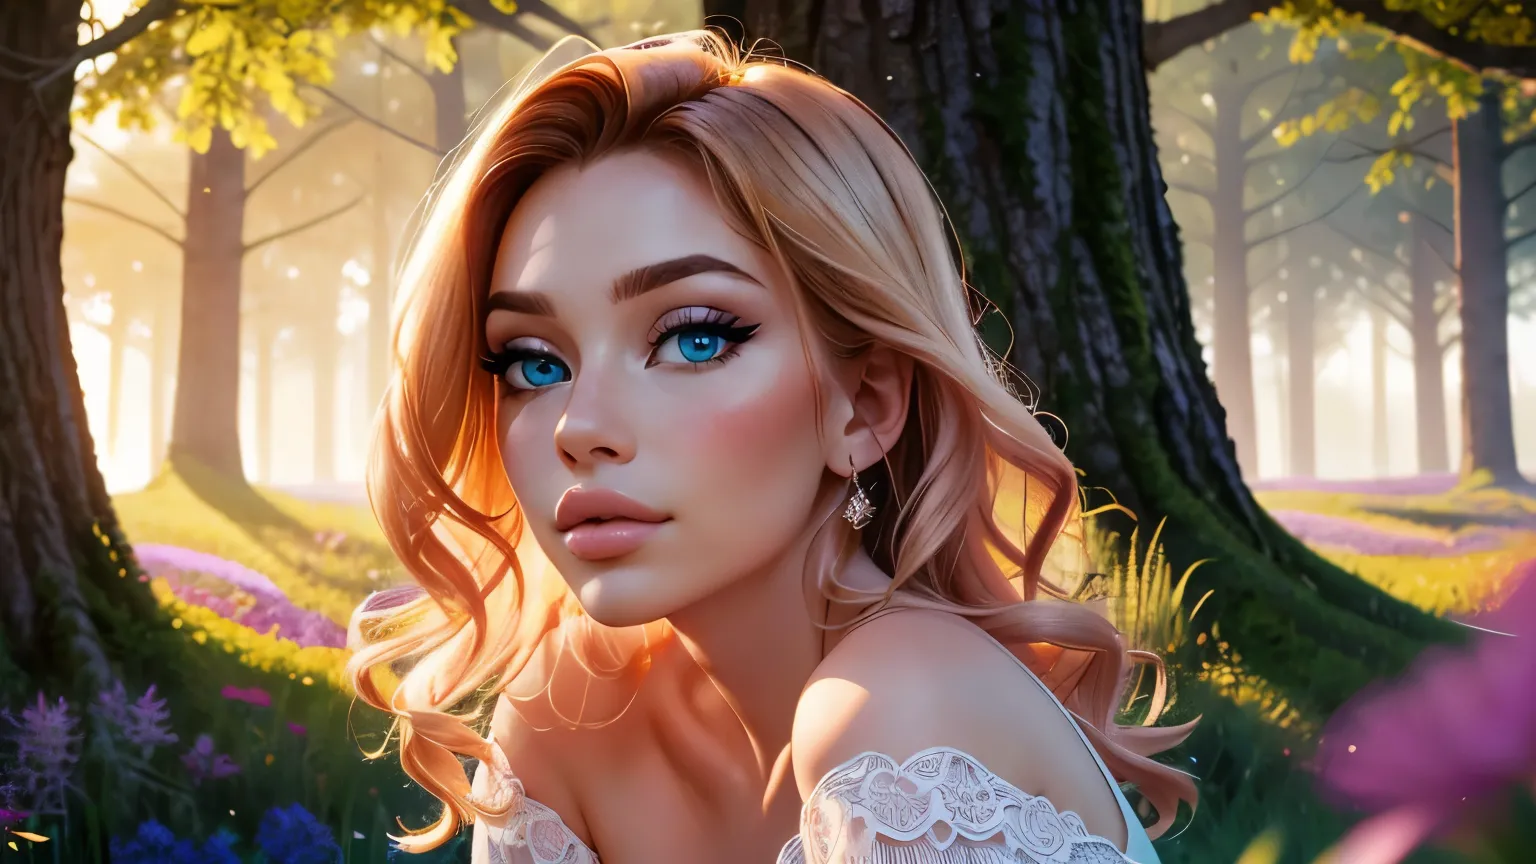 (best quality,4k,8k,highres,masterpiece:1.2),ultra-detailed,(realistic,photorealistic,photo-realistic:1.37),portrait of a beautiful young blonde woman in a shiny green meadow, with long curly hair flowing in the breeze. She is dressed in a lace short white dress that accentuates her stunning figure. Her captivating blue eyes gaze into the distance, reflecting the serenity of the landscape. The sunlight filters through the trees, casting a soft glow on her porcelain skin. Surrounding her are vibrant wildflowers, their colors enhancing the overall beauty of the scene. The atmosphere is filled with a sense of tranquility and grace. The expert brushstrokes and attention to detail showcase the artist's skill in capturing the elegance and charm of the subject. The composition is reminiscent of a classic portrait, with the woman taking center stage against the picturesque backdrop. The use of vivid colors adds a touch of vibrancy and life to the artwork, creating a captivating visual experience. The lighting highlights the contours of her face and accentuates her natural beauty, creating a mesmerizing interplay of light and shadow. This artwork blends elements of realism and fantasy, evoking a sense of wonder and enchantment.